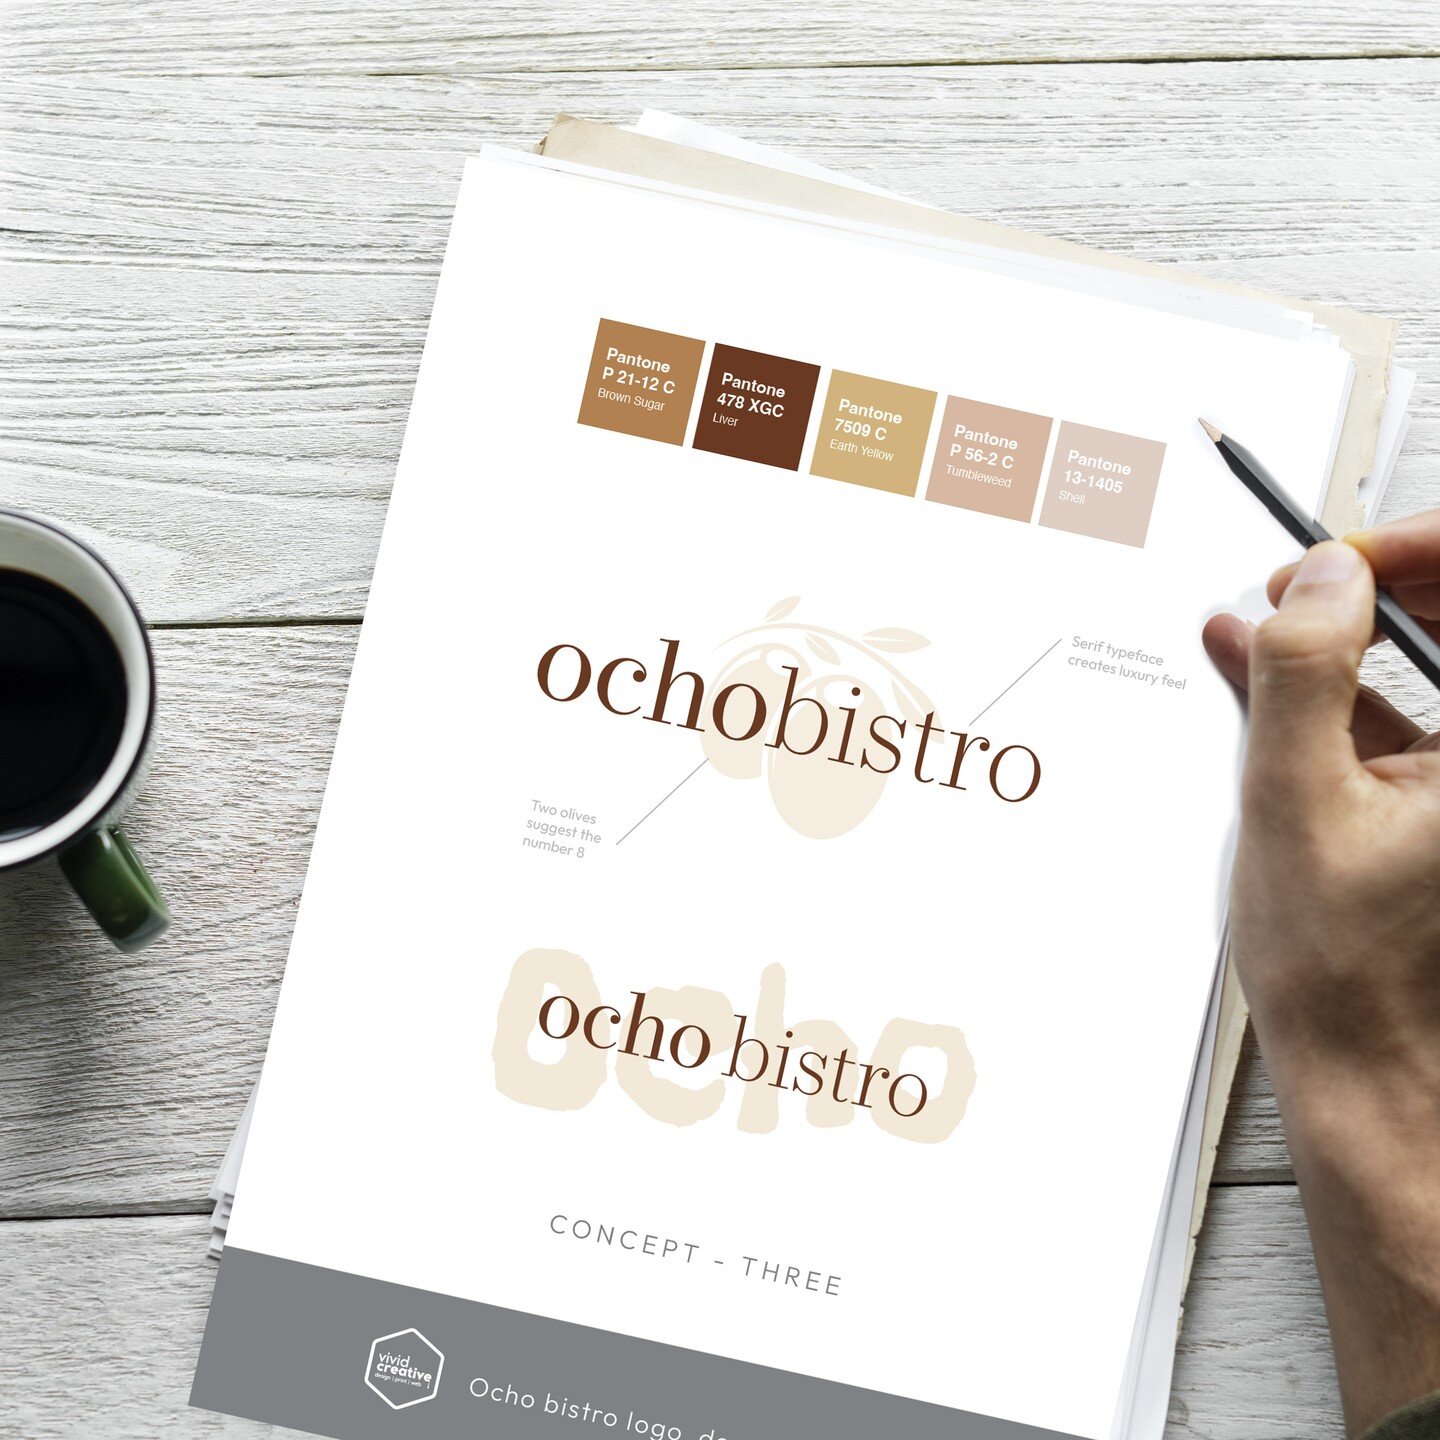 Recent branding project in progress for ocho bistro. We've crafted a fresh new look that captures the vibrant essence of Spanish cuisine and culture.
.
The colour palette, a blend of warm earthy tones and passionate reds, reflects the passion and war